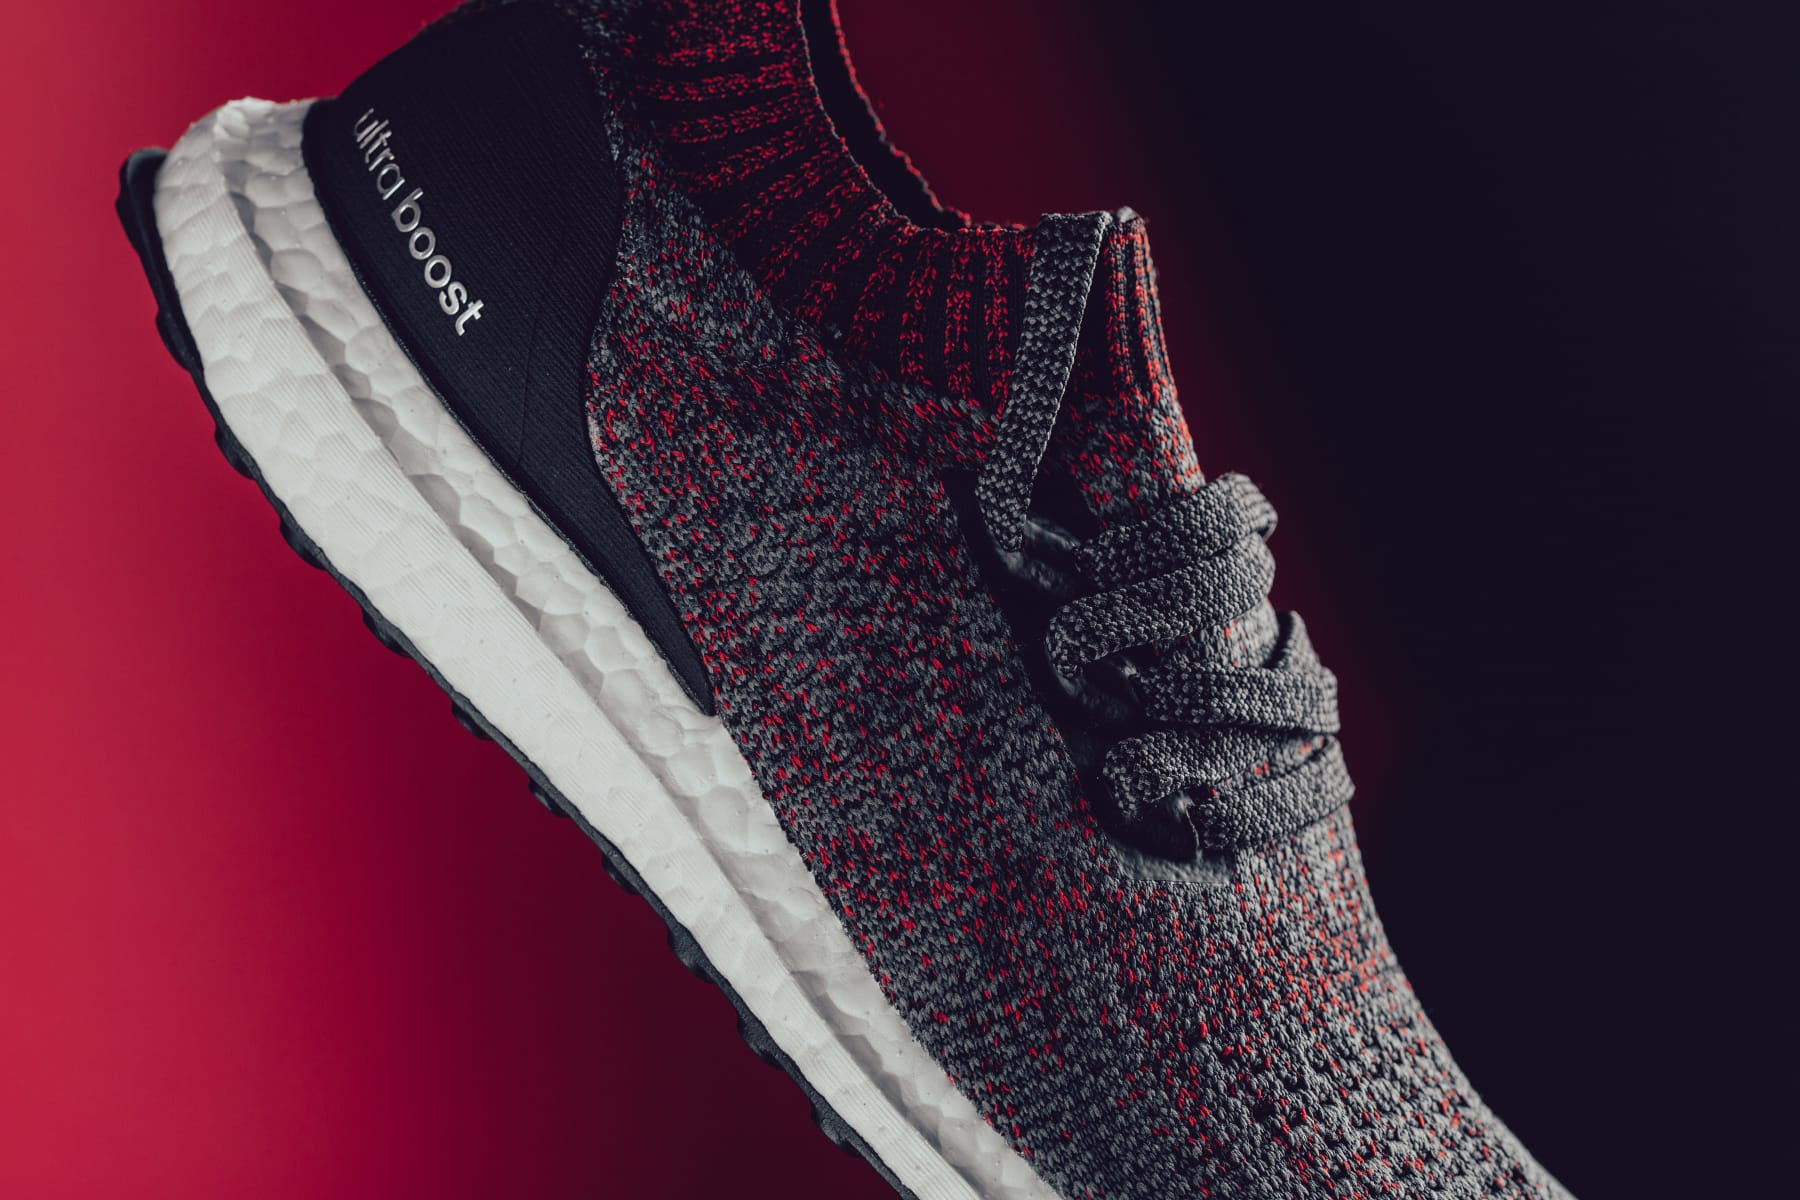 adidas ultraboost uncaged carbon